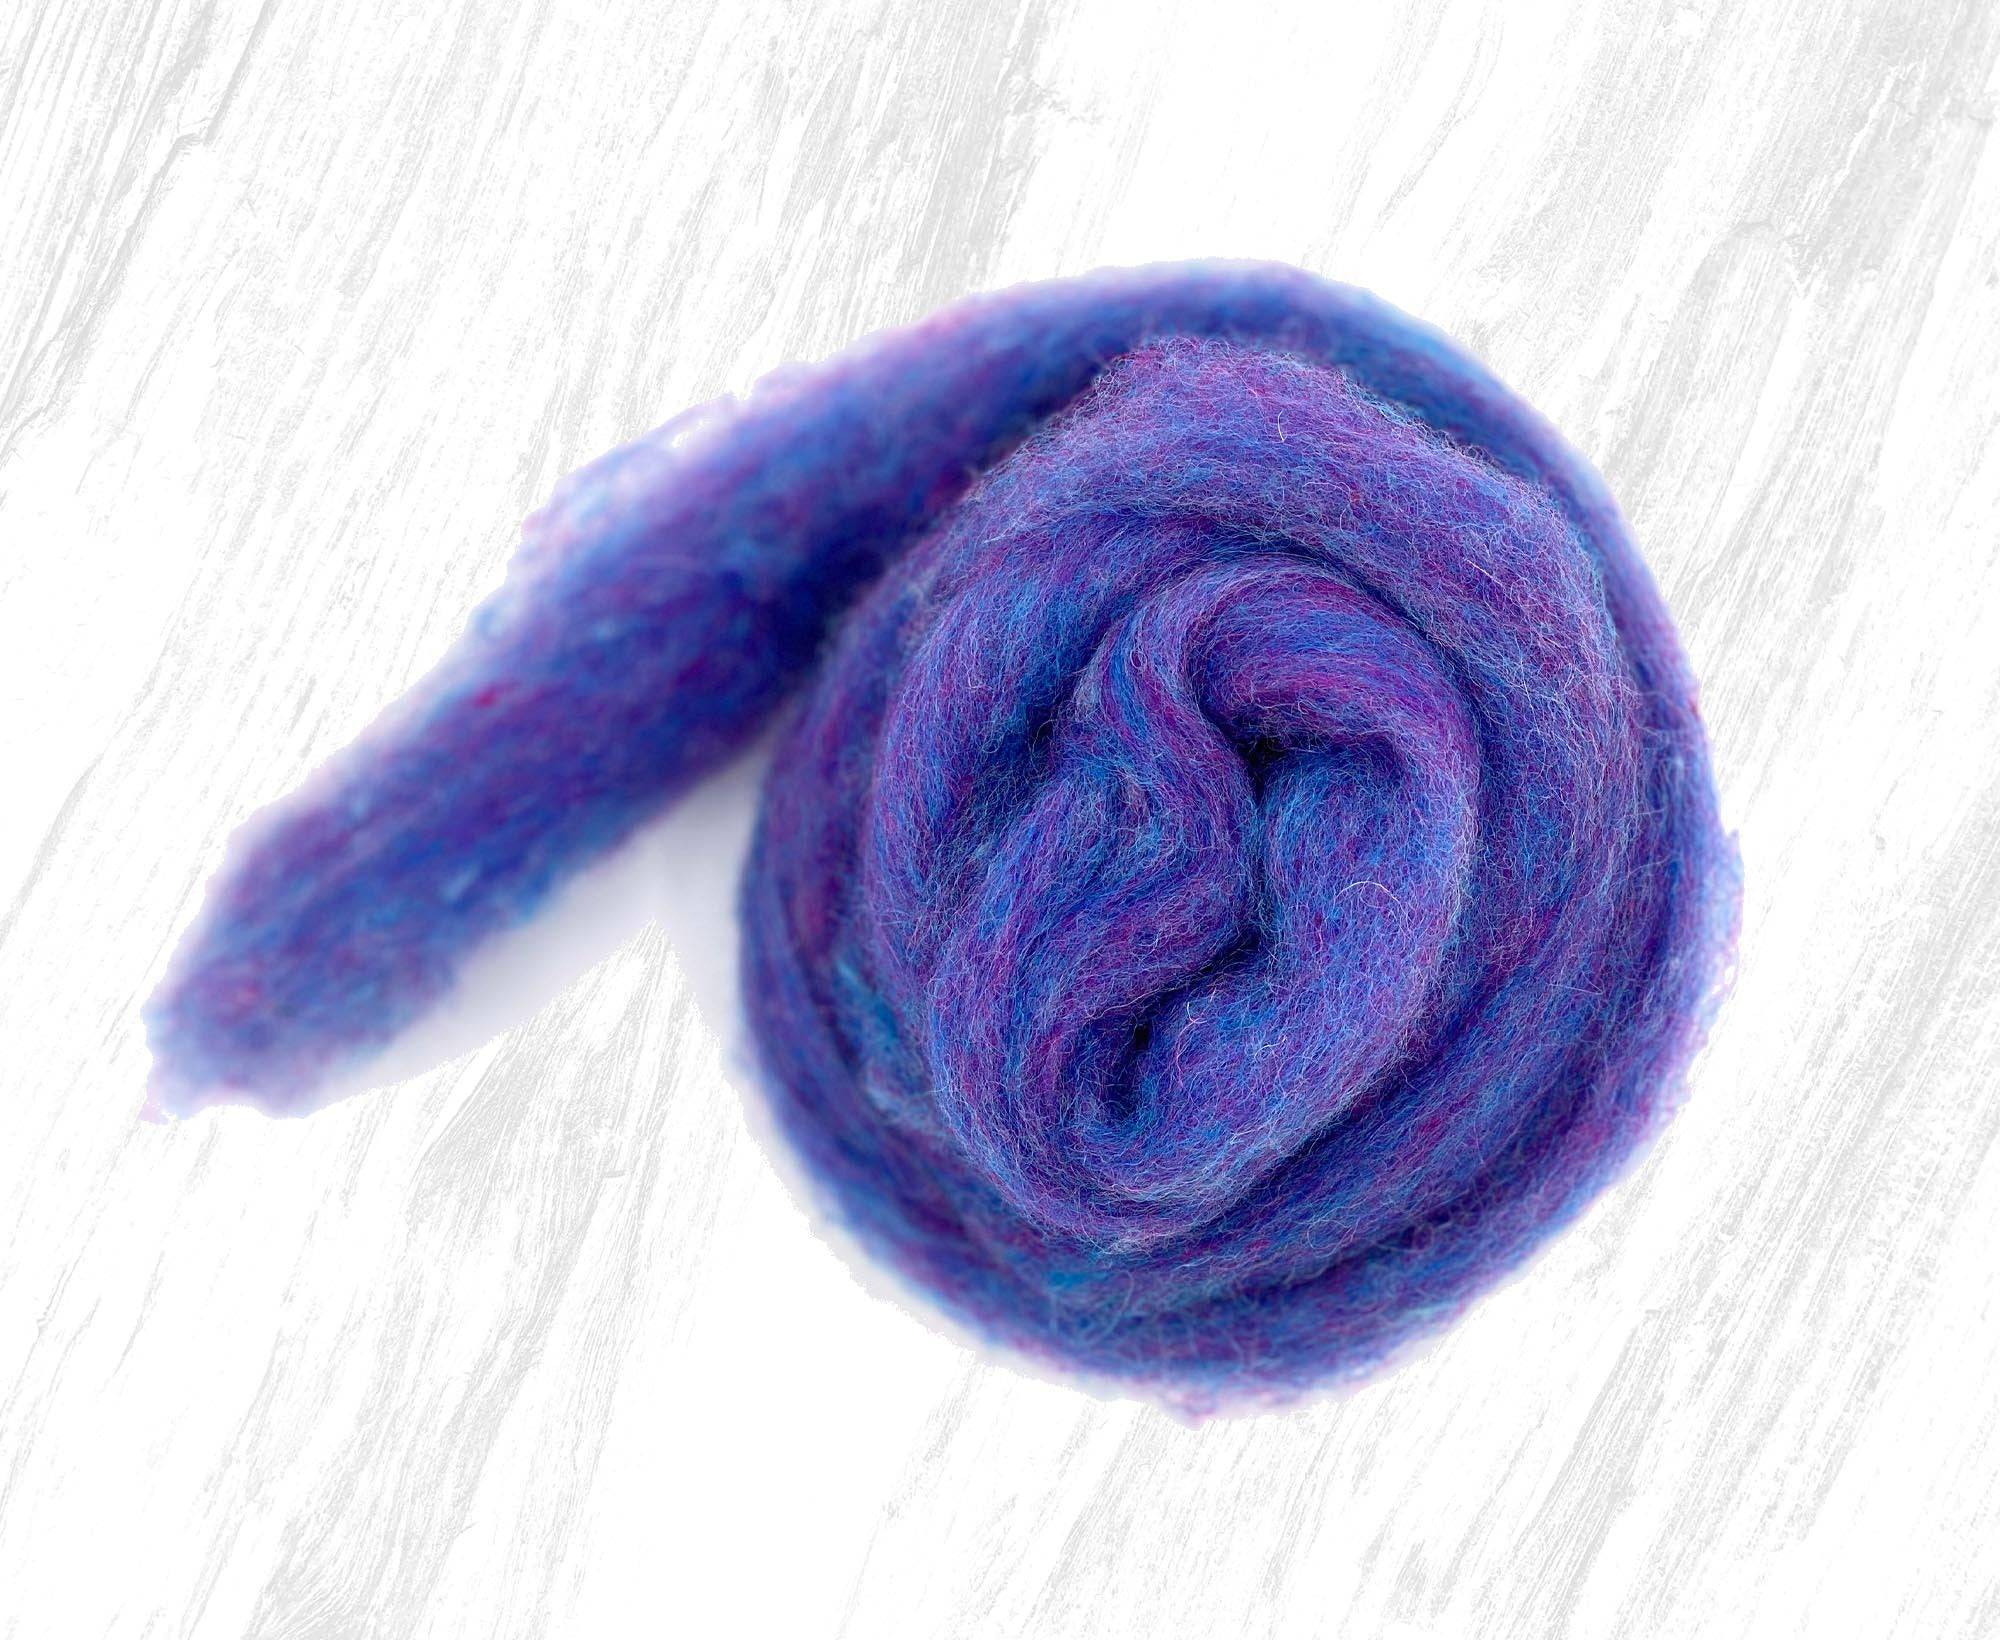 Parma Violet - World of Wool